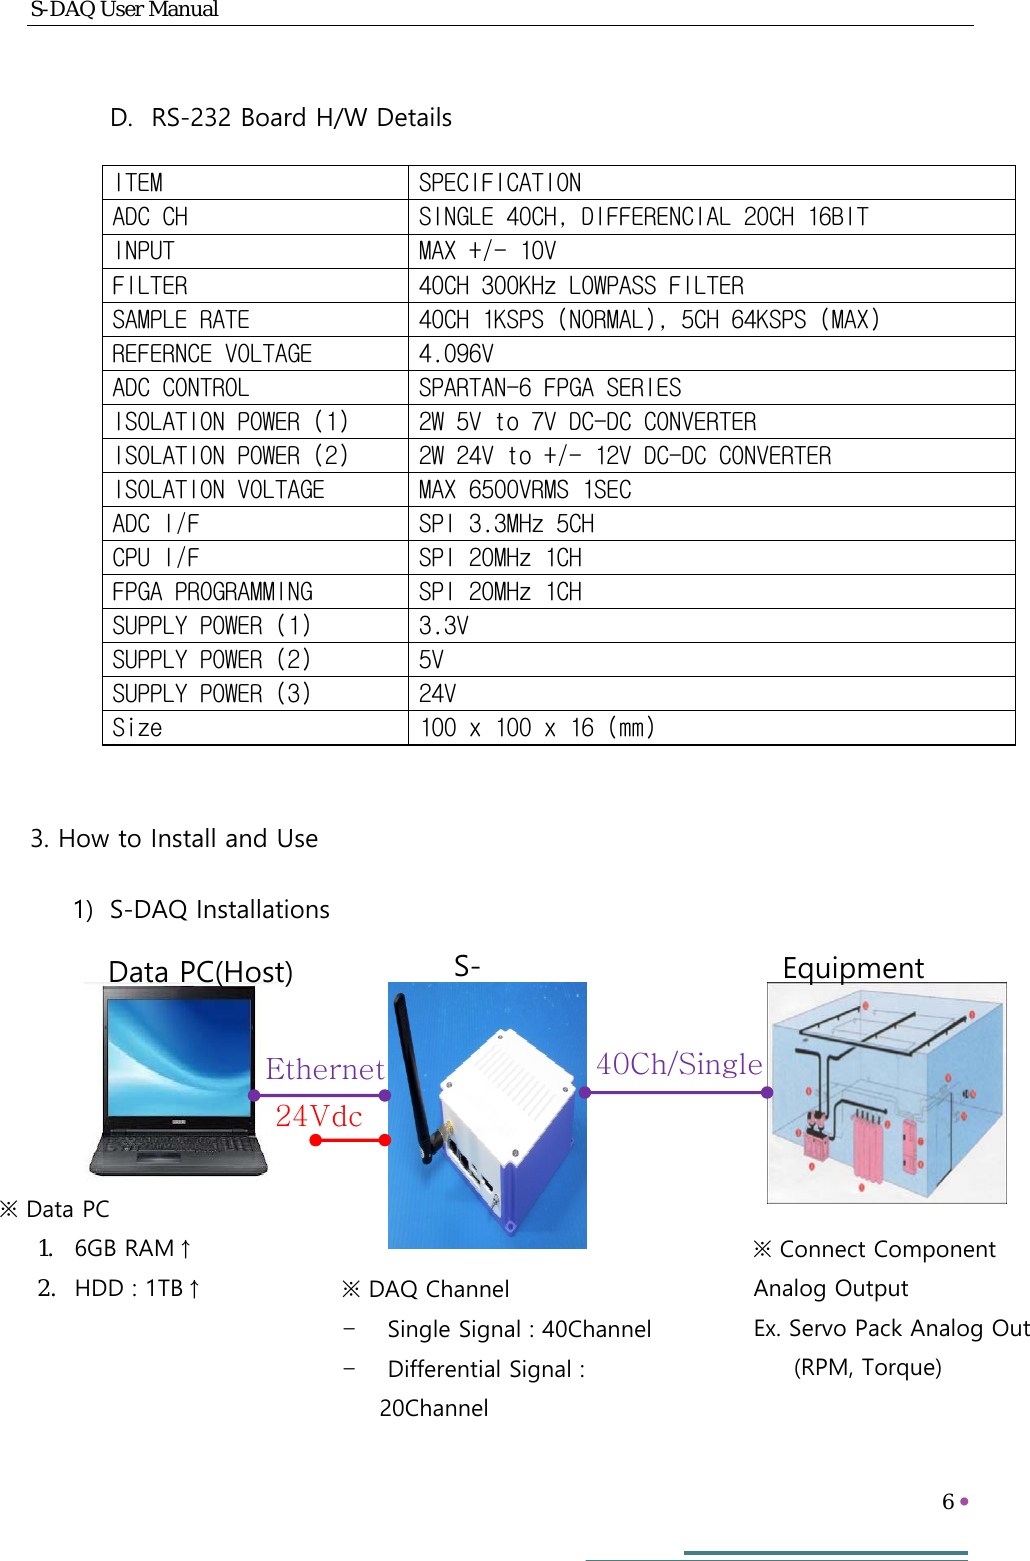 S-DAQ User Manual   6     Ethernet 40Ch/Single 24Vdc Data PC(Host) S- Equipment※ Data PC  1. 6GB RAM↑ 2. HDD : 1TB↑ ※ Connect Component Analog Output Ex. Servo Pack Analog Out     (RPM, Torque) ※ DAQ Channel -  Single Signal : 40Channel -  Differential Signal : 20Channel D. RS-232 Board H/W Details ITEM  SPECIFICATION ADC CH  SINGLE 40CH, DIFFERENCIAL 20CH 16BIT INPUT  MAX +/- 10V FILTER  40CH 300KHz LOWPASS FILTER SAMPLE RATE  40CH 1KSPS (NORMAL), 5CH 64KSPS (MAX) REFERNCE VOLTAGE  4.096V ADC CONTROL  SPARTAN-6 FPGA SERIES ISOLATION POWER (1)  2W 5V to 7V DC-DC CONVERTER  ISOLATION POWER (2)  2W 24V to +/- 12V DC-DC CONVERTER  ISOLATION VOLTAGE  MAX 6500VRMS 1SEC ADC I/F  SPI 3.3MHz 5CH CPU I/F  SPI 20MHz 1CH FPGA PROGRAMMING  SPI 20MHz 1CH SUPPLY POWER (1)  3.3V SUPPLY POWER (2)  5V SUPPLY POWER (3)  24V Size  100 x 100 x 16 (mm)  3. How to Install and Use 1) S-DAQ Installations        